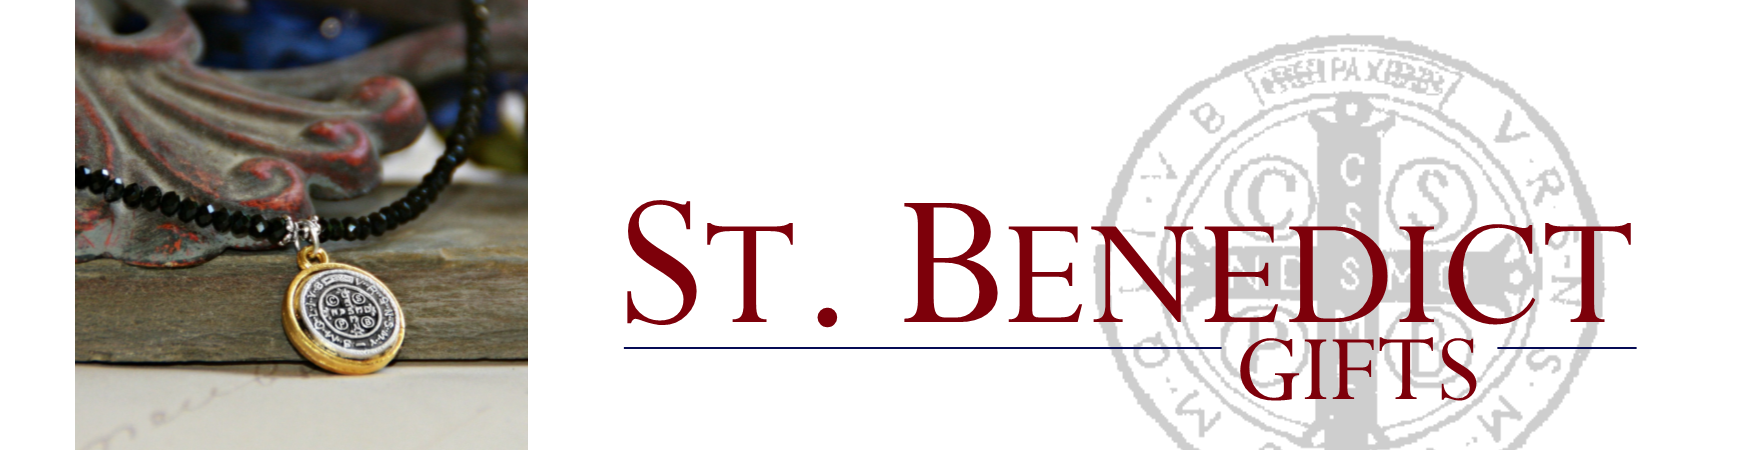 St. Benedict Gifts